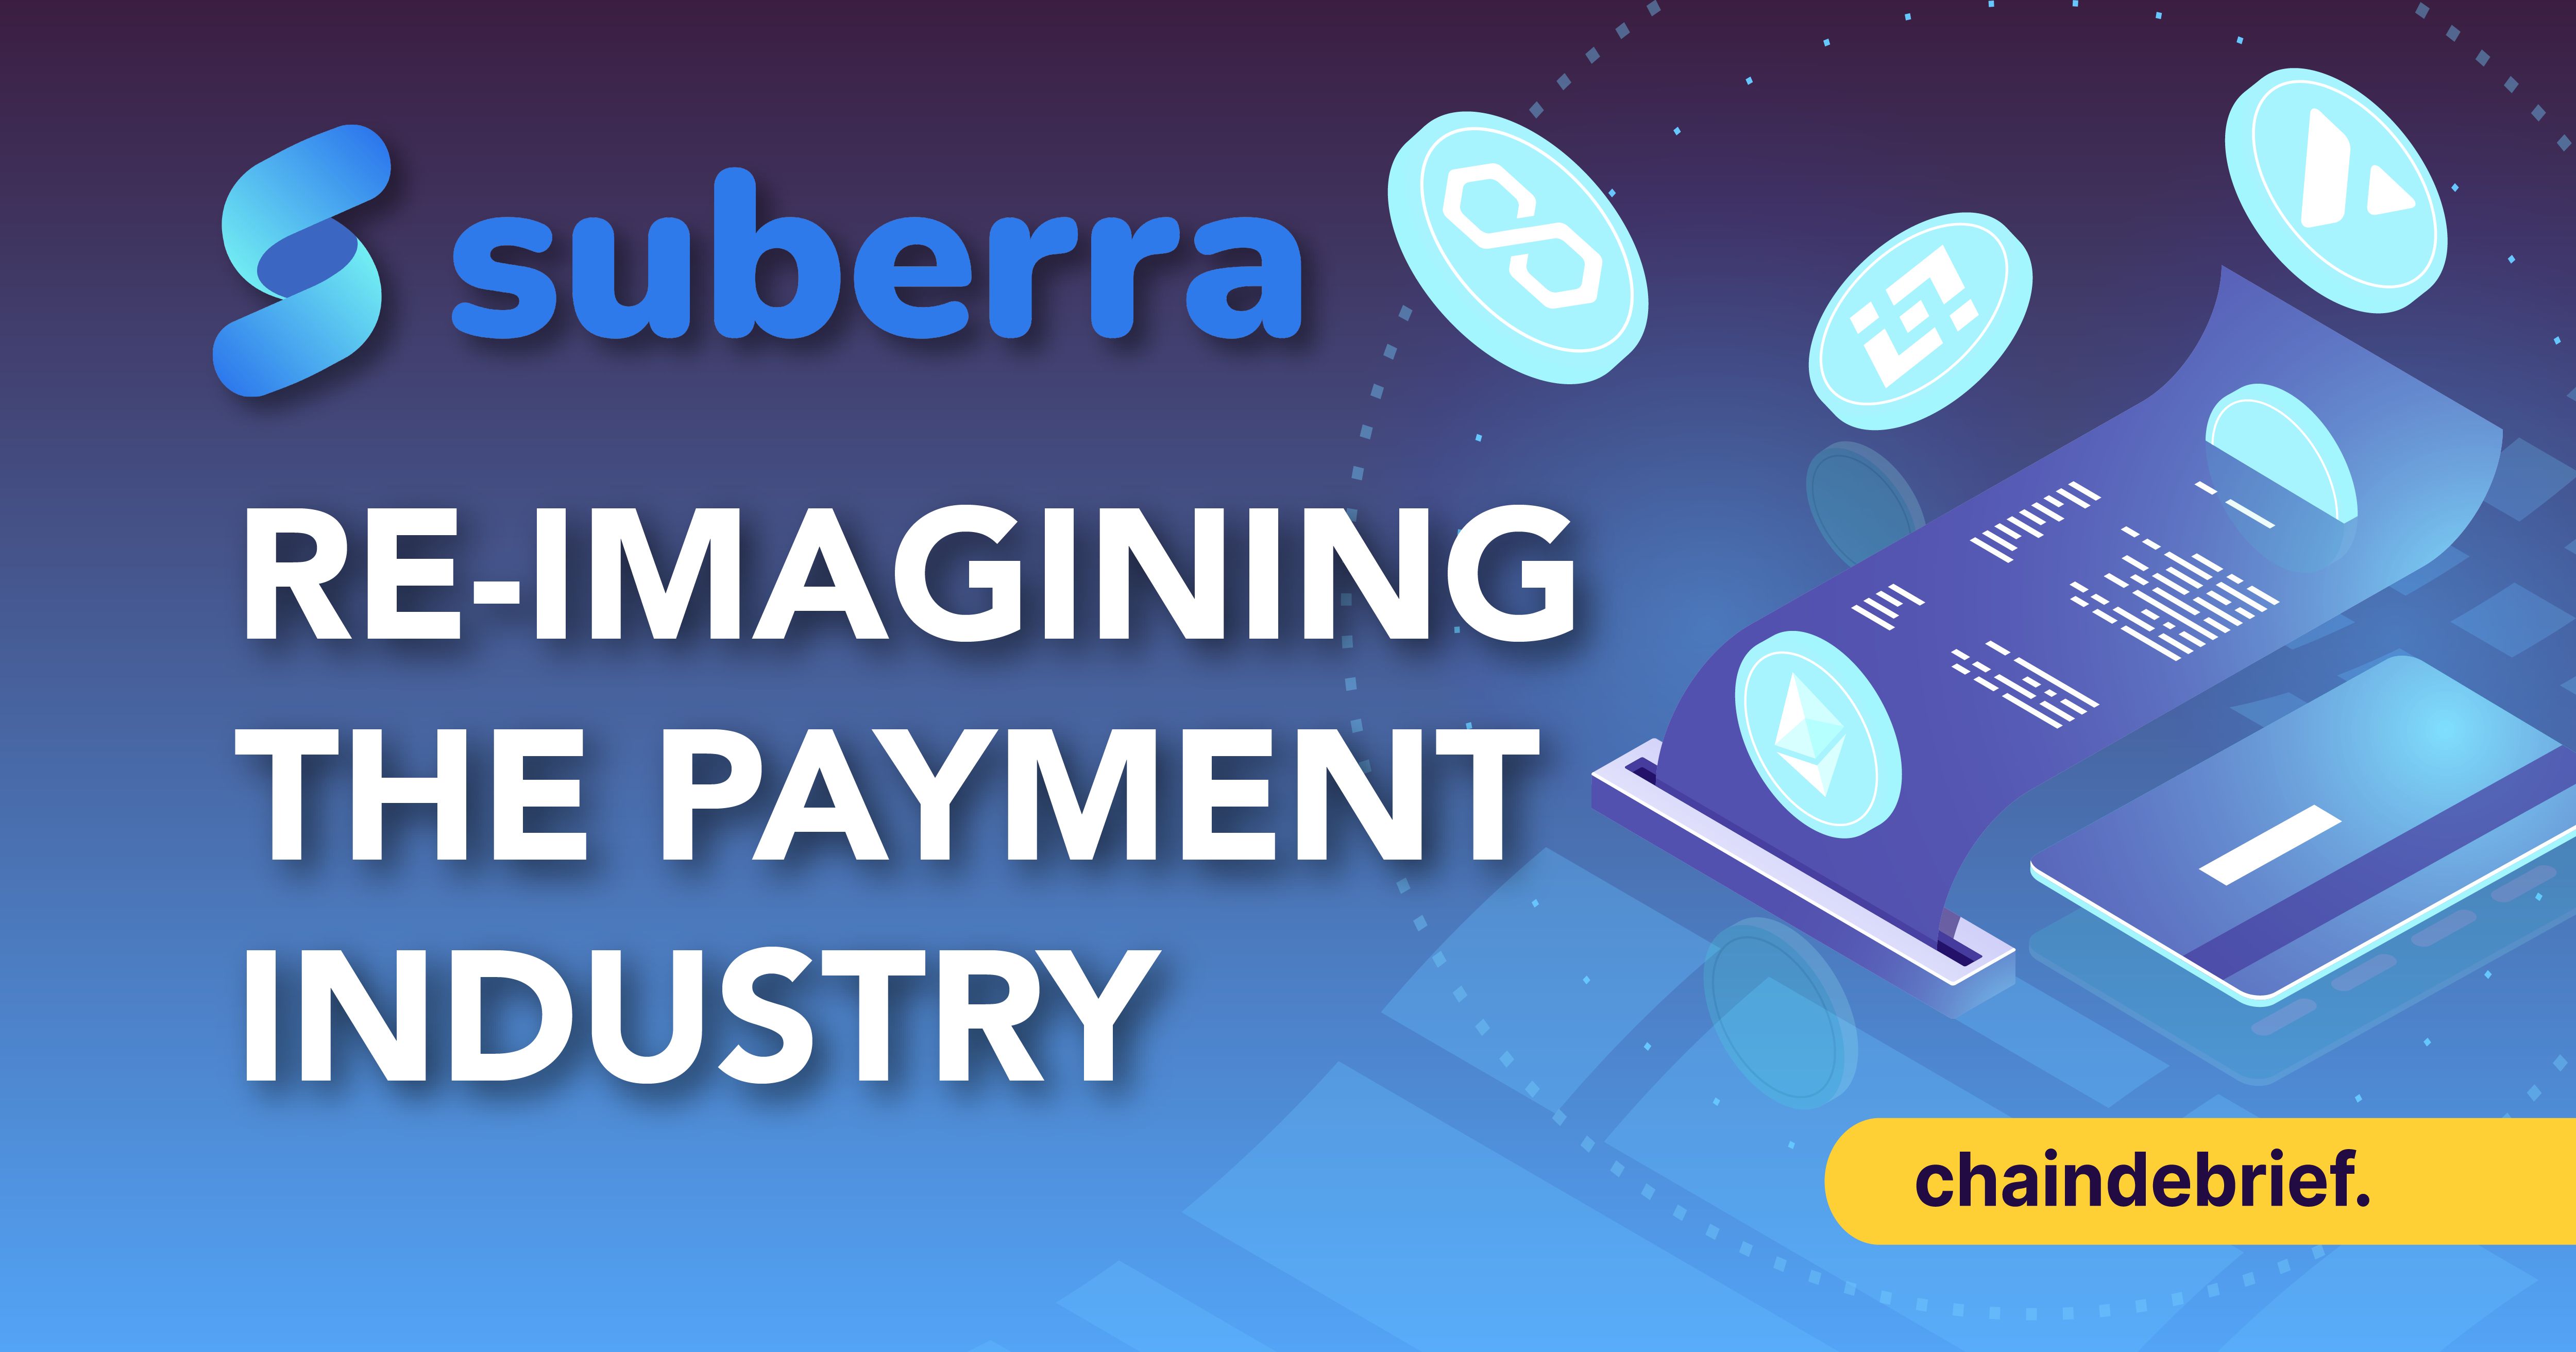 SG Web 3.0 Startup Suberra Going Big In Building A Multi-Chain Web3 Payment Platform